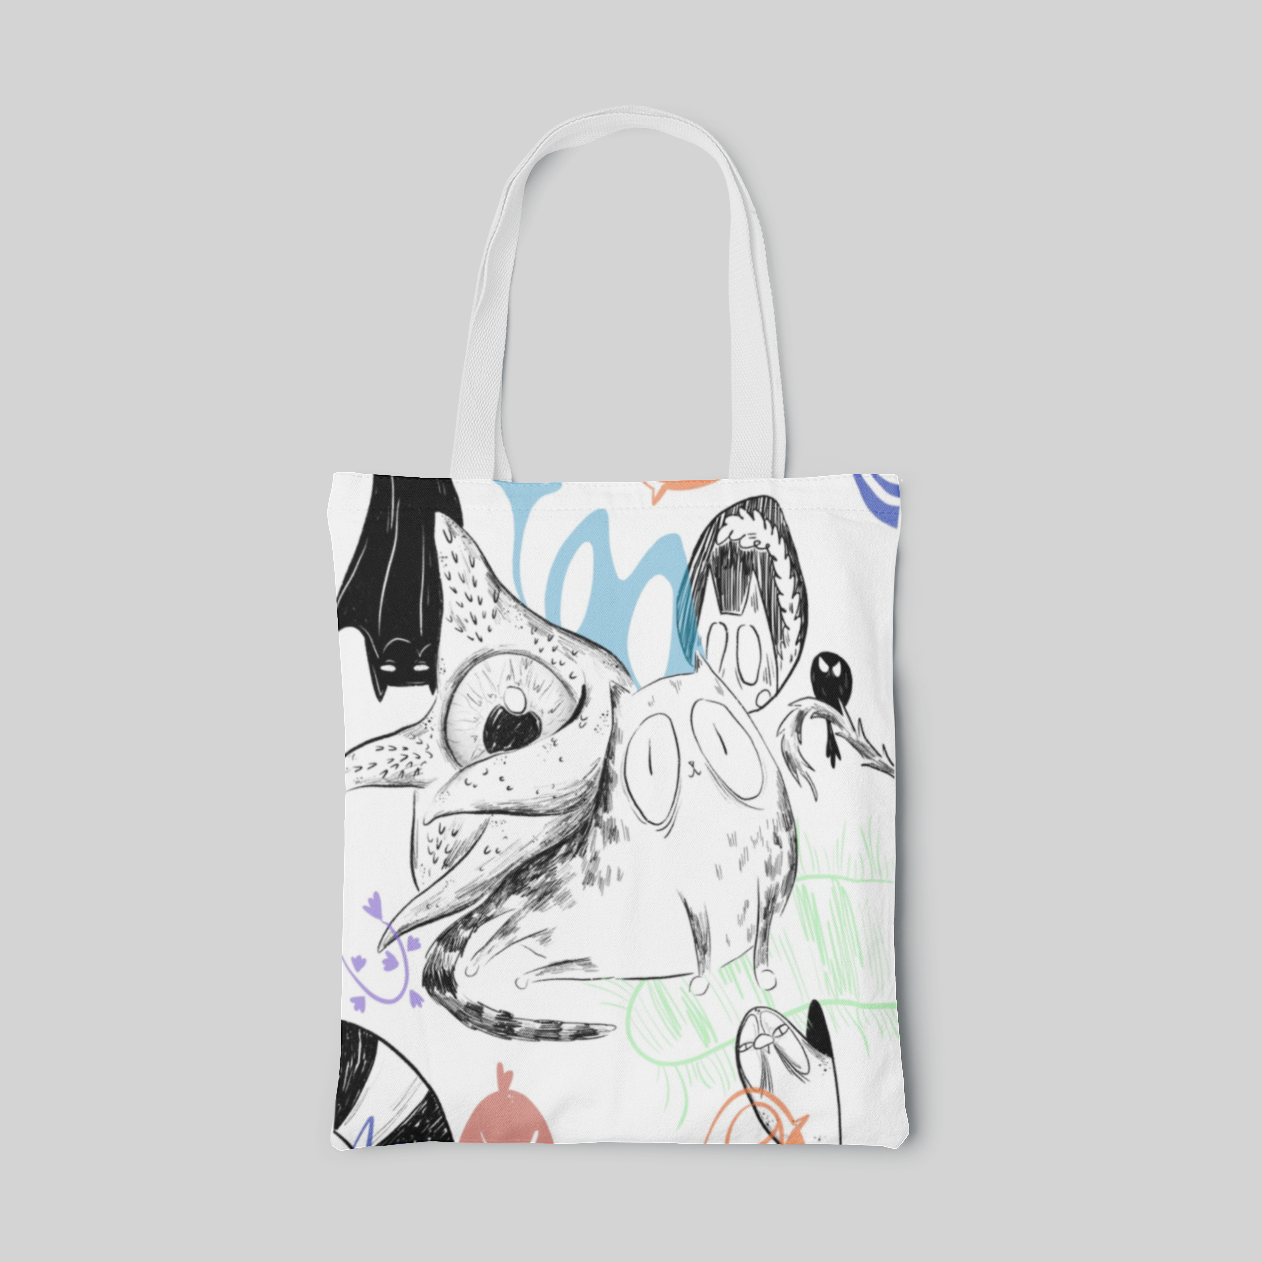 White lowbrow designed tote bag with cartoon cat and abstract shapes skeches, front side